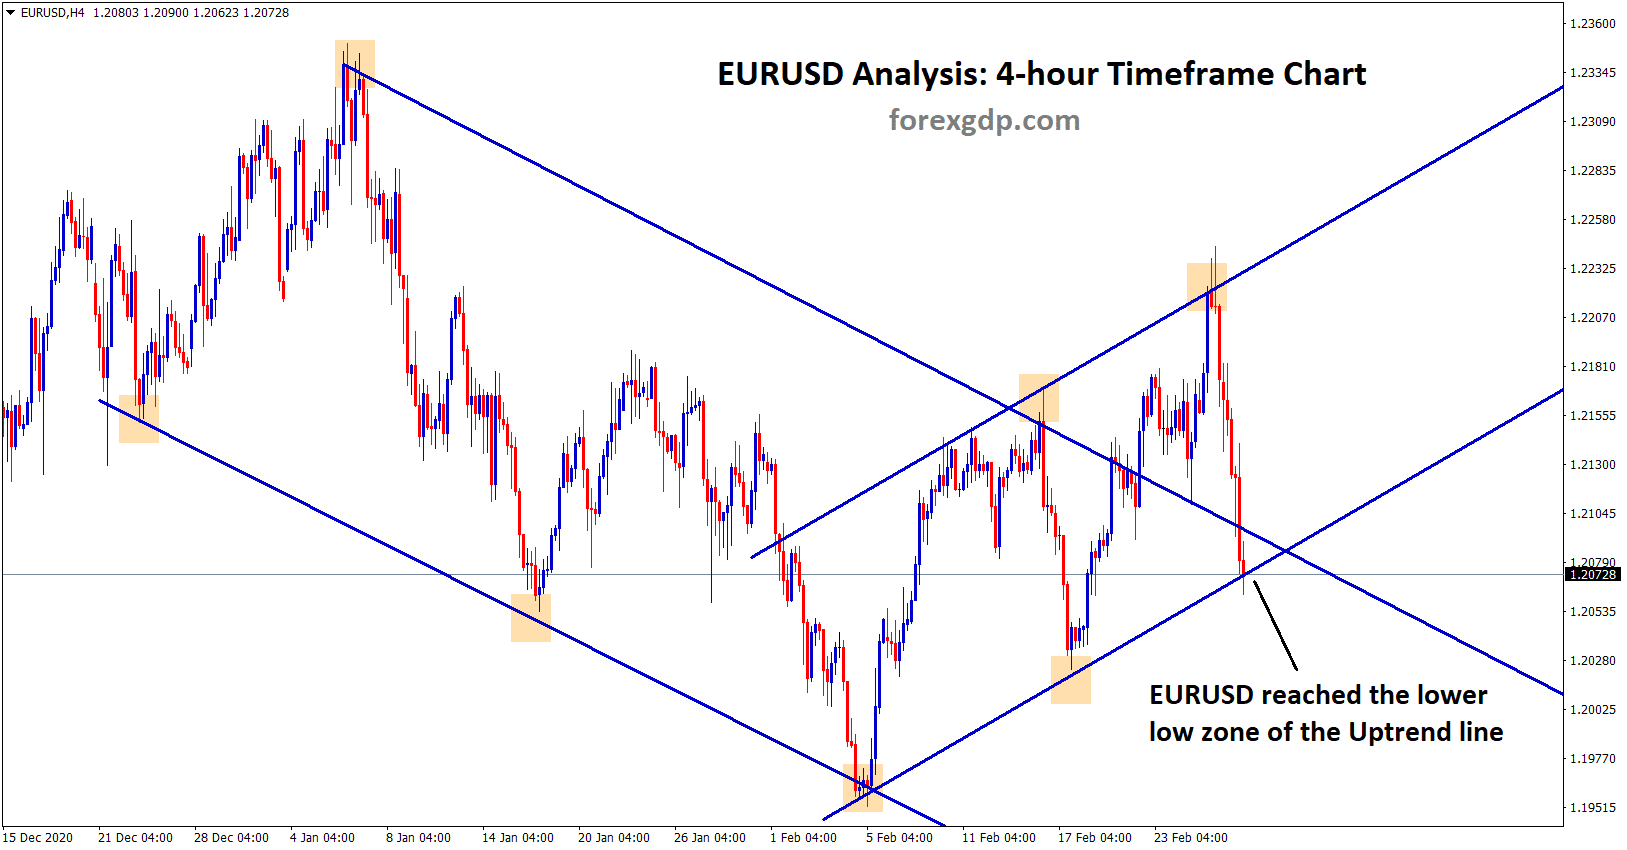 eurusd reached the lower low zone of the uptrend line